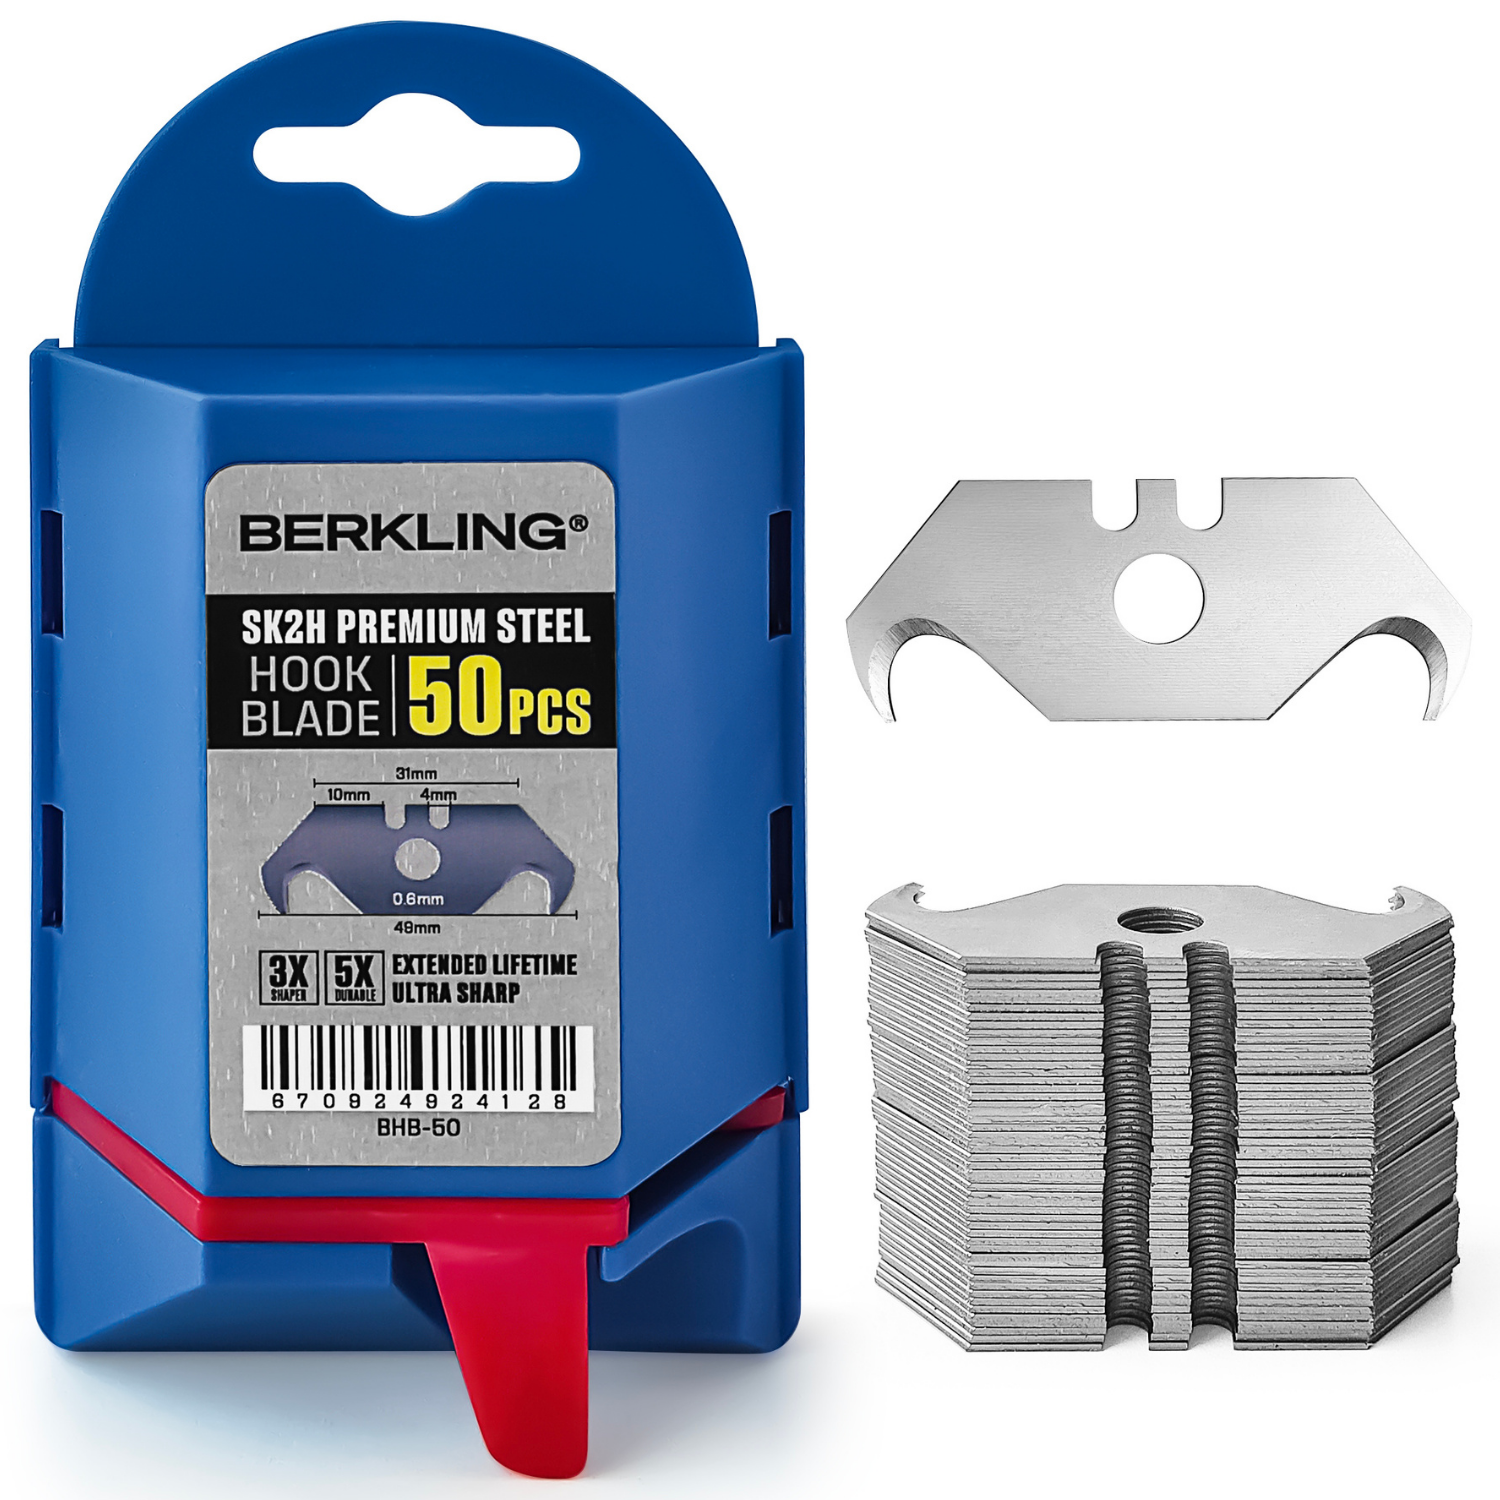 Berkling SK2H Hook Blade Utility Knife Blade 50-Pack With Dispenser, Ultra 3X Sharper and 5X More Durable, Compatible w/ Most Box & Carpet Cutters